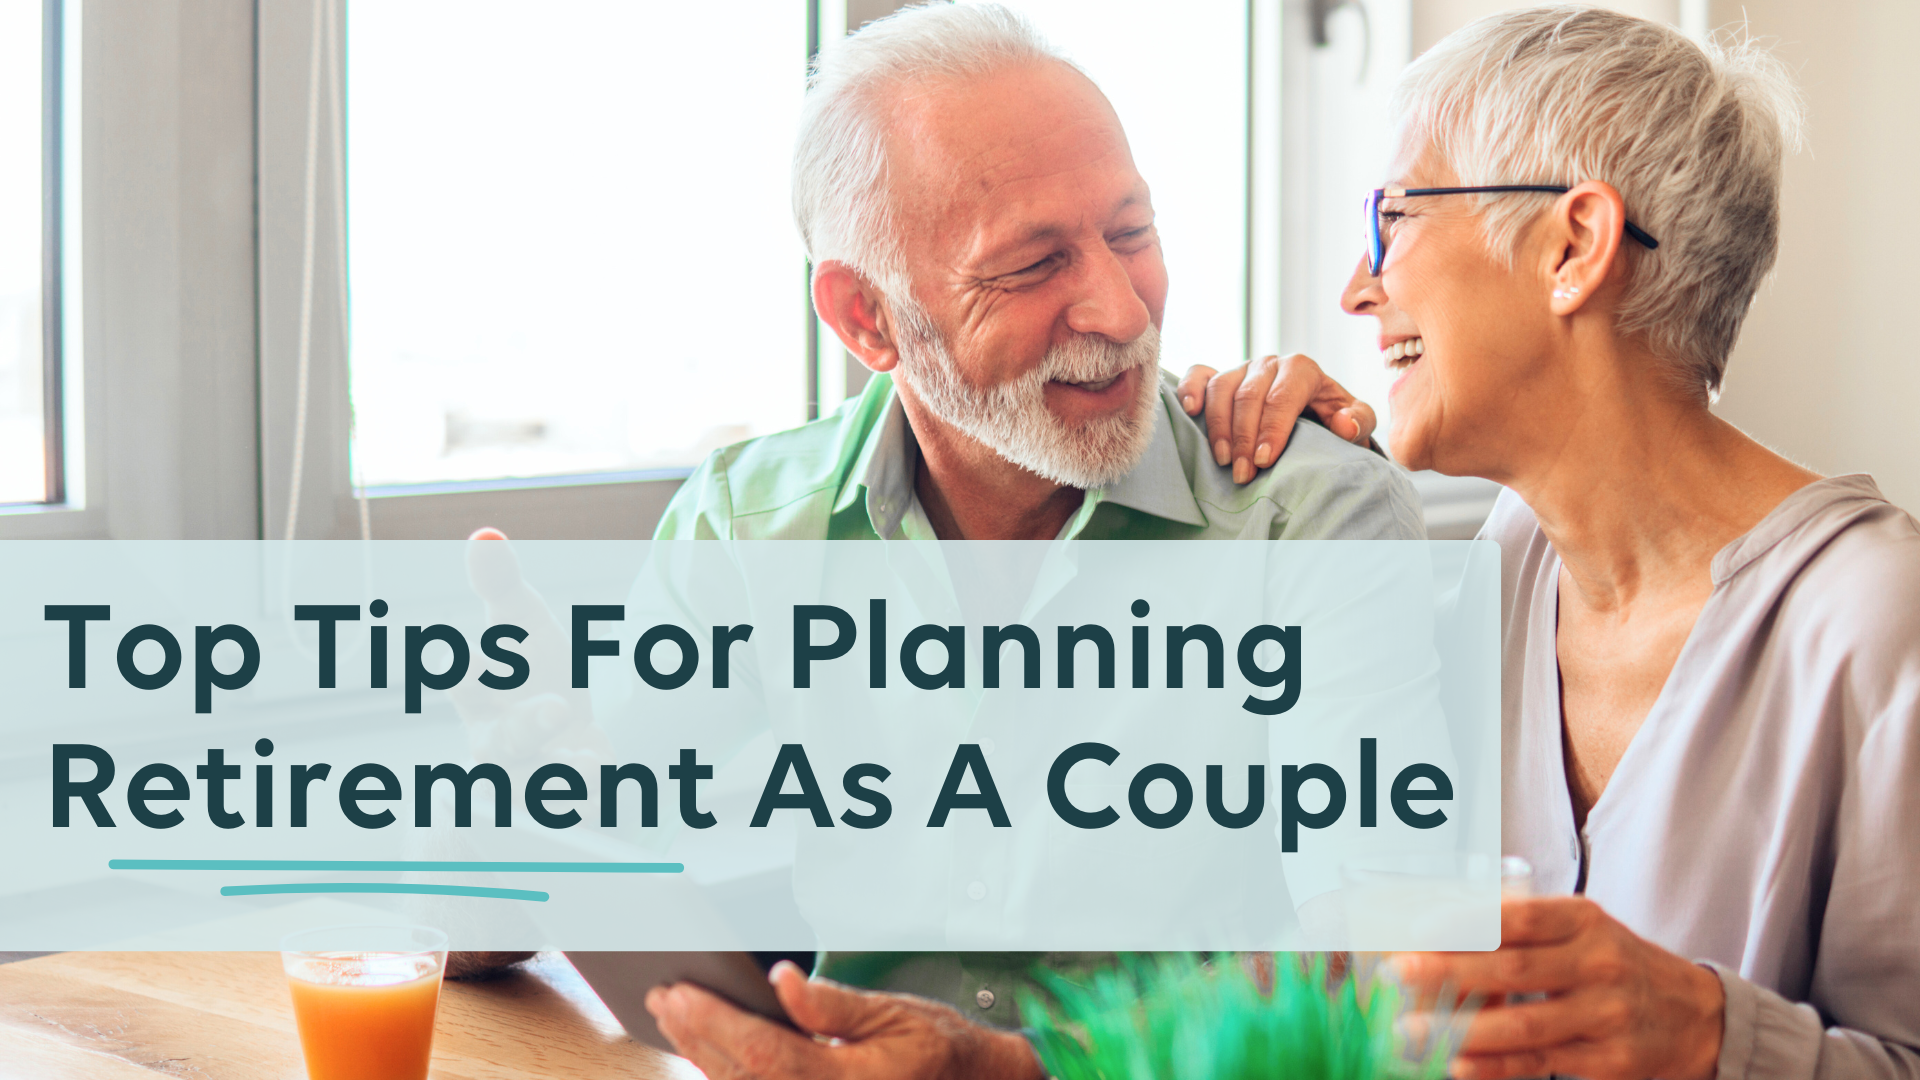 Top Tips For Planning Retirement As A Couple